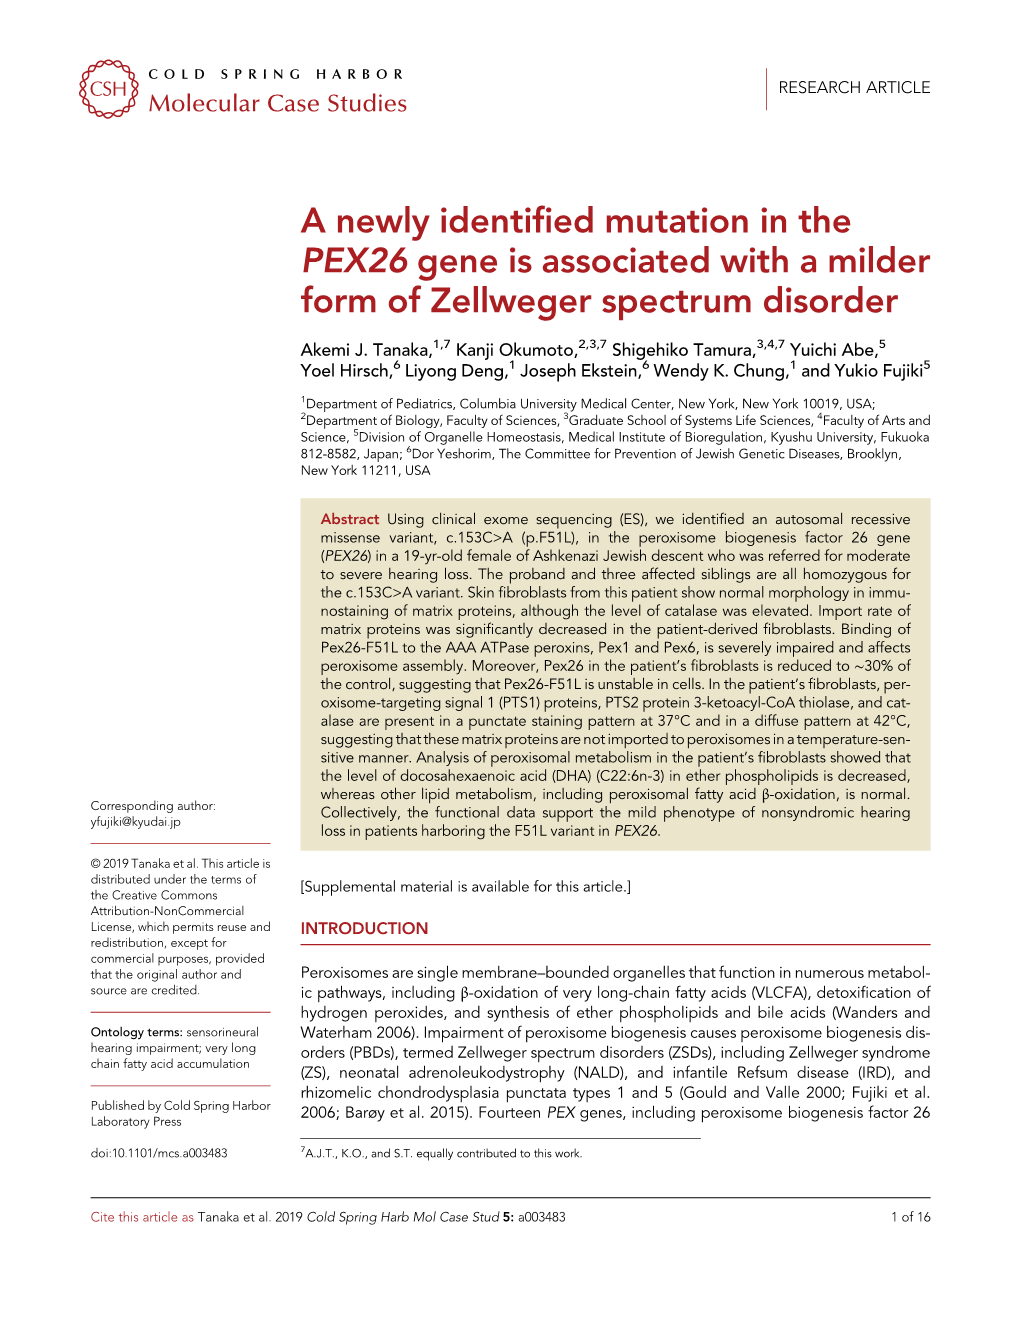 A Newly Identified Mutation in the PEX26 Gene Is Associated with a Milder Form of Zellweger Spectrum Disorder